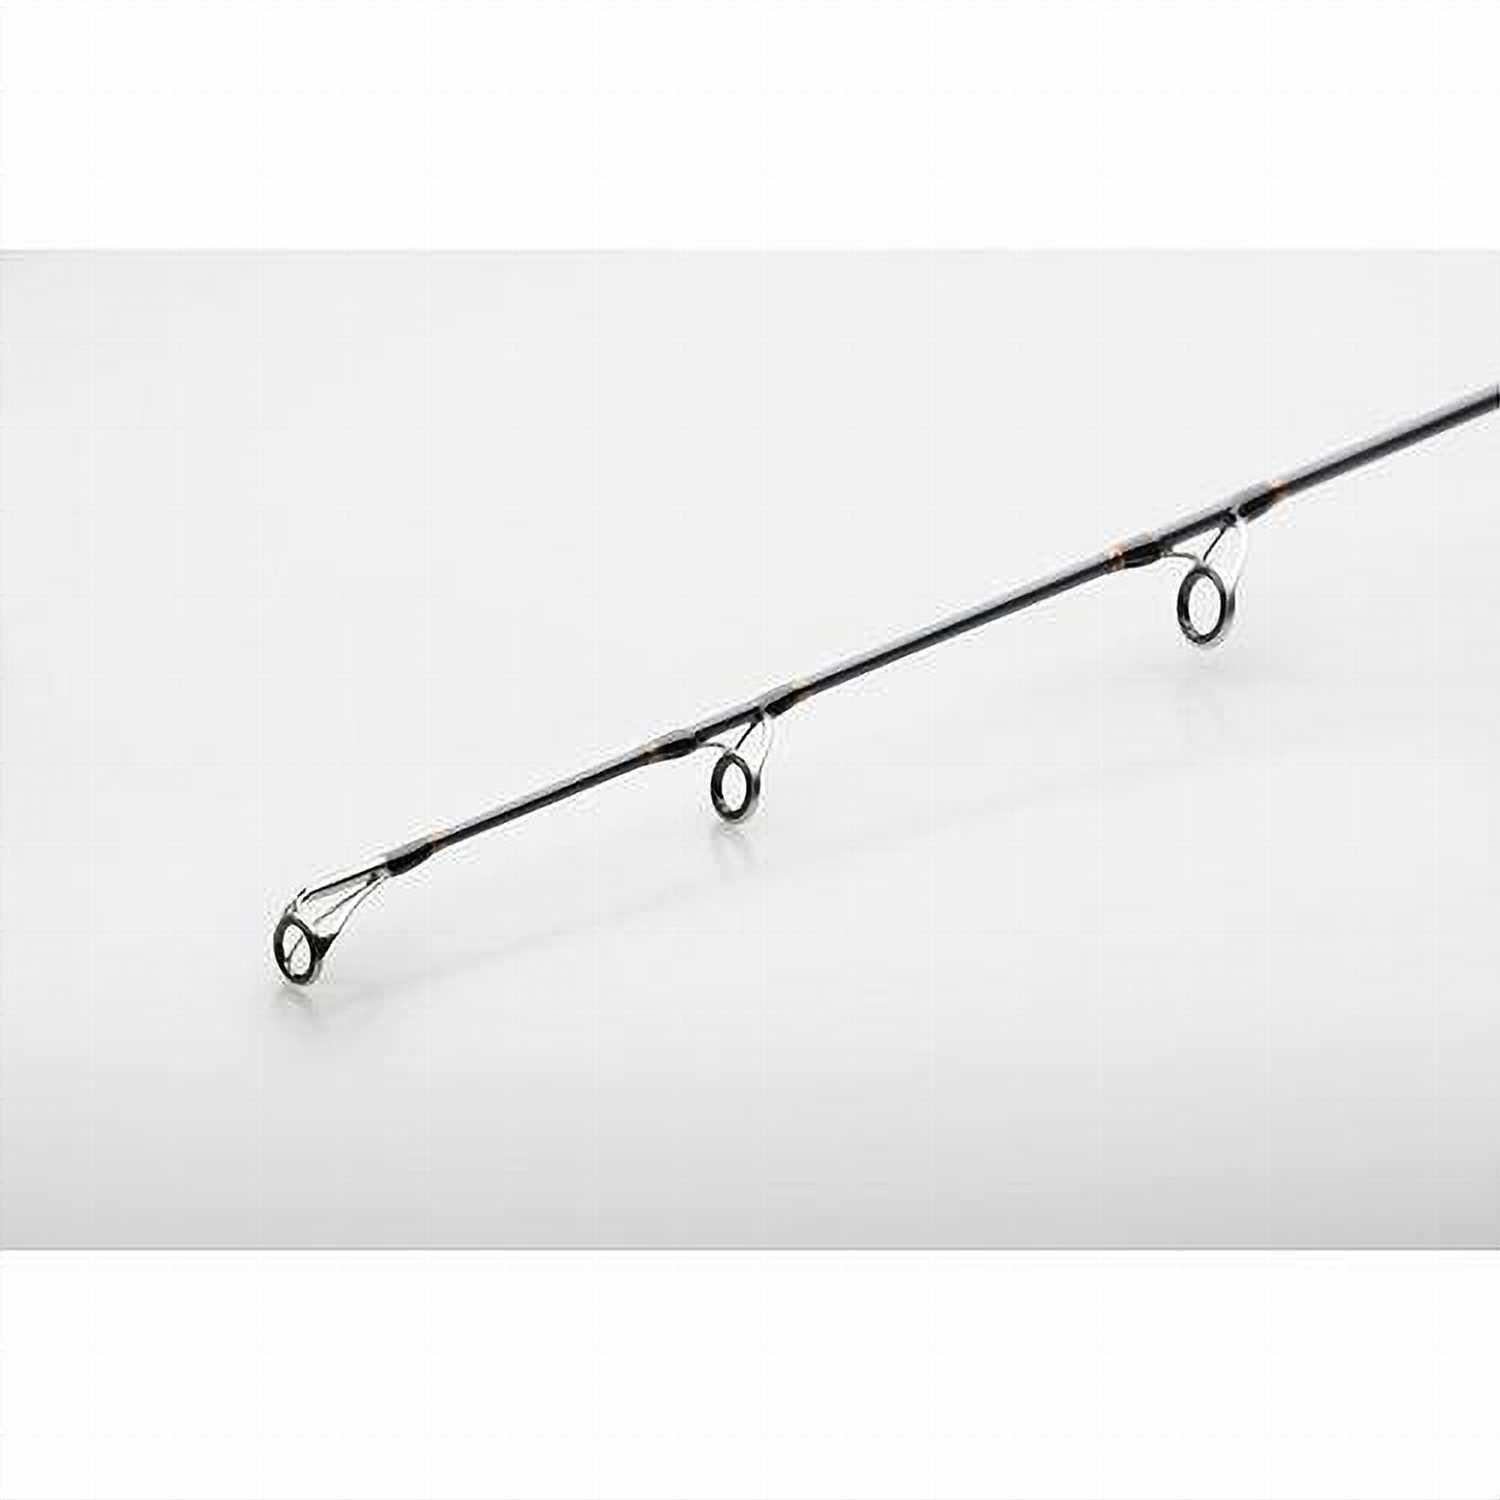 PENN Battalion Solid Broume 6' 50-100lbs K-Guide 1pc